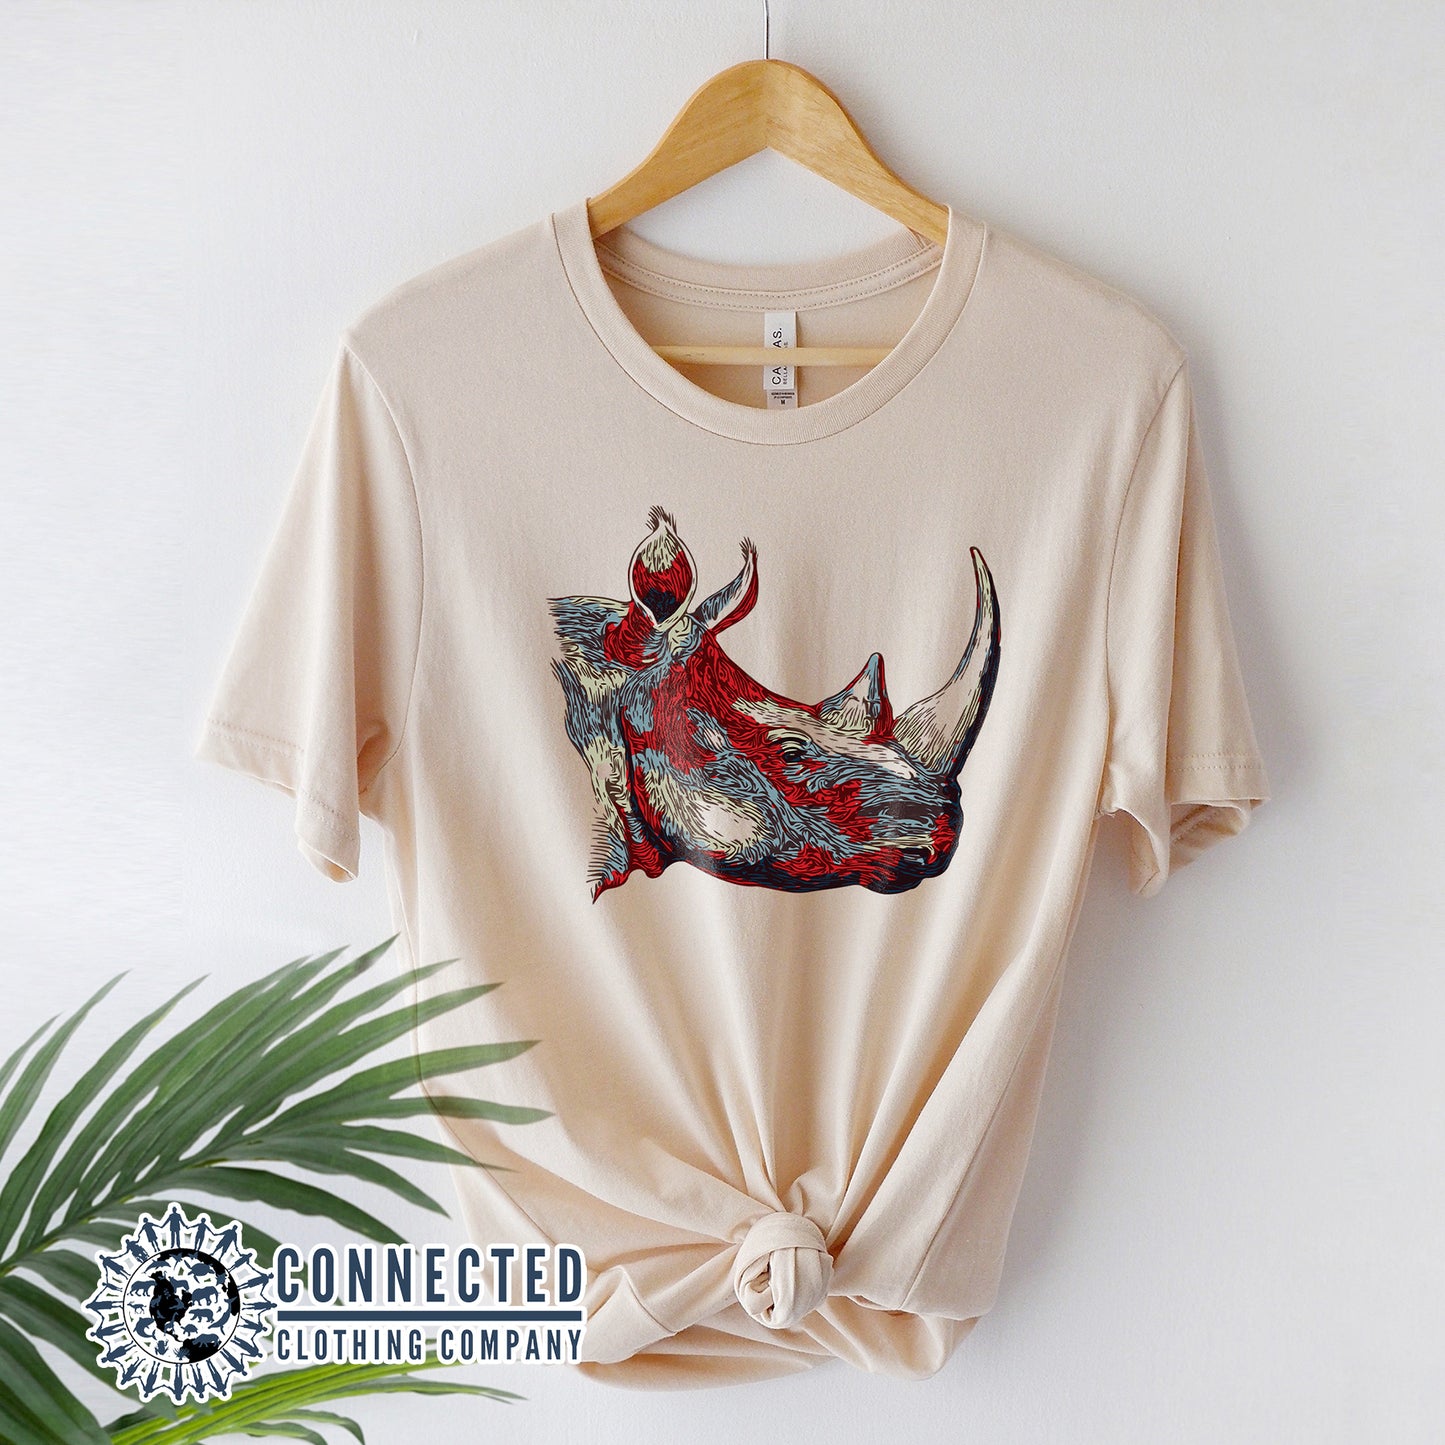 Hanger With Soft Cream Vanishing Into Extinction Rhino Tshirt - Connected Clothing Company - Ethically and Sustainable Clothing - 10% of proceeds are donated to rhino conservation